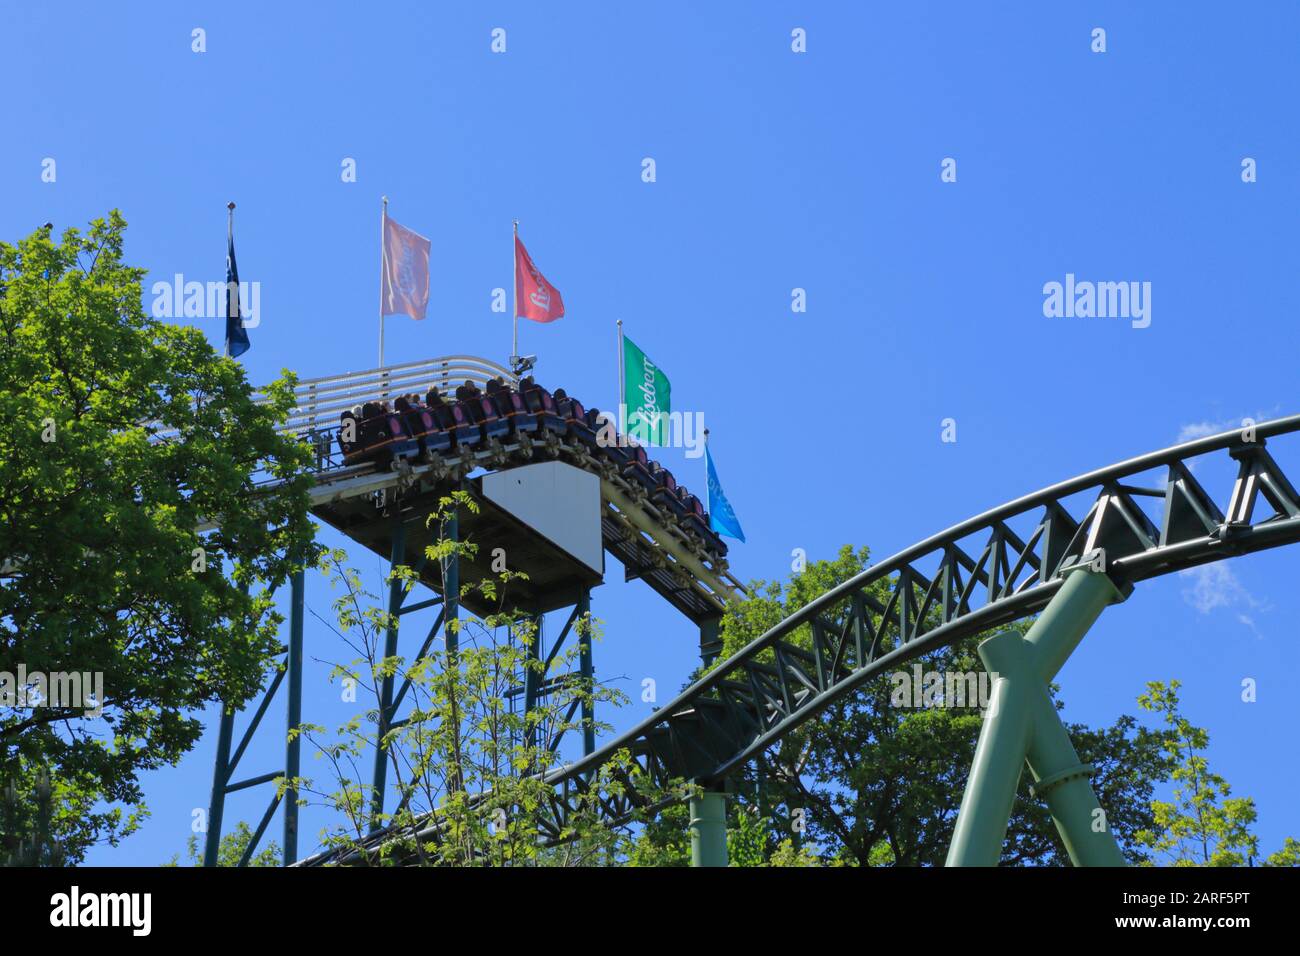 People on a roller coaster train in Liseberg amusement park in Gothenburg city, Sweden. Stock Photo